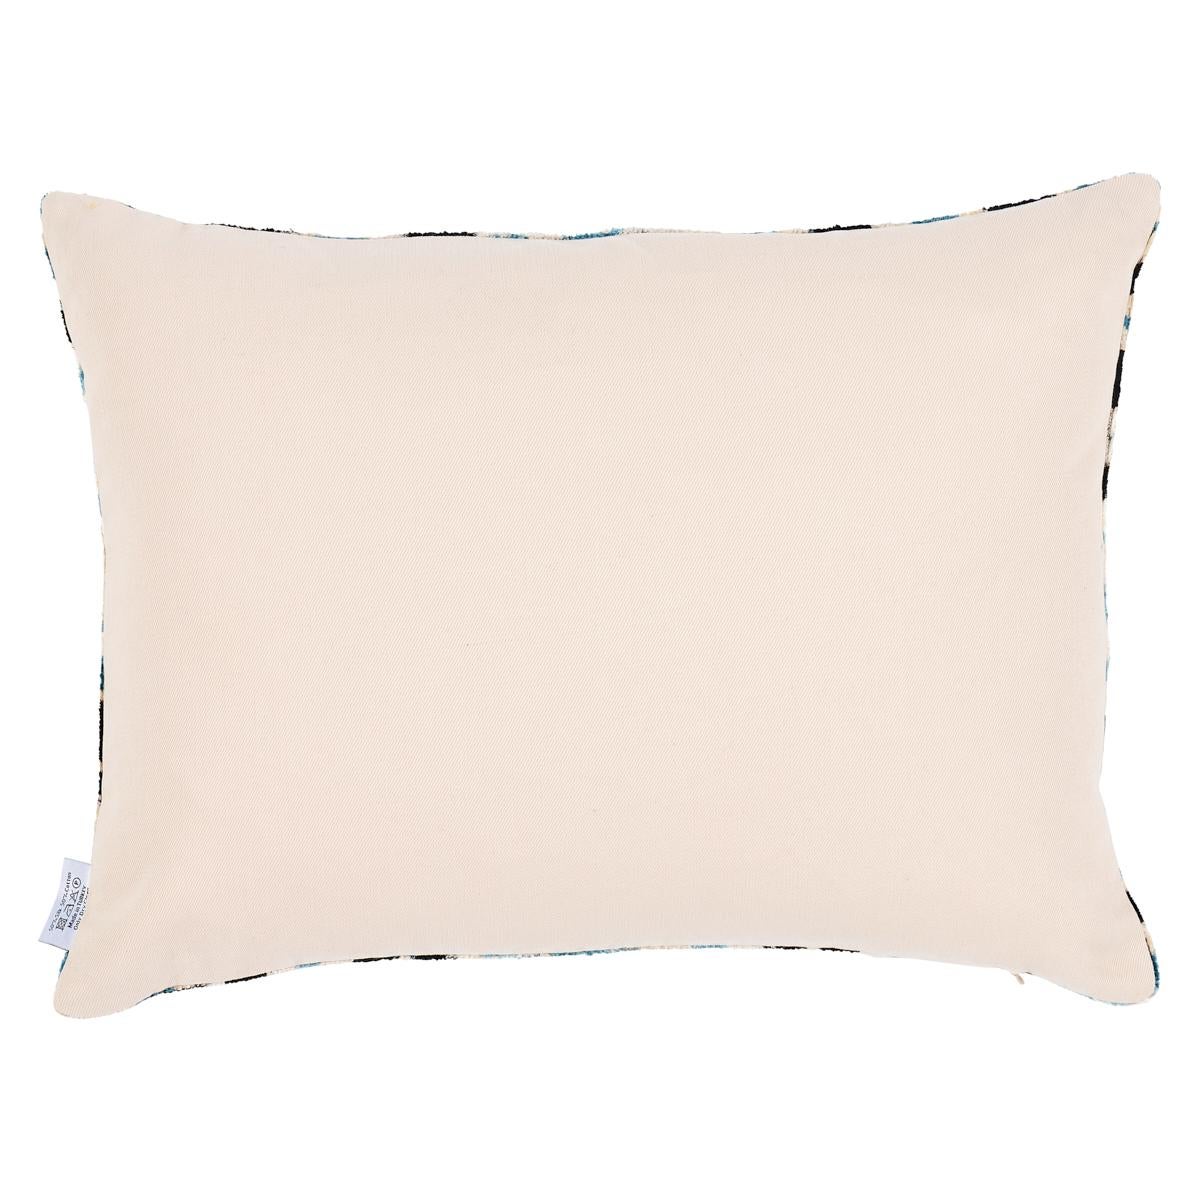 The Edirne Silk Velvet Pillow by Les Ottomans features handwoven fabric with a knife edge finish. Les Ottomans pillows are handmade in Istanbul, juxtaposing the traditional patterns of Turkey with a wide range of contemporary colors, designs and